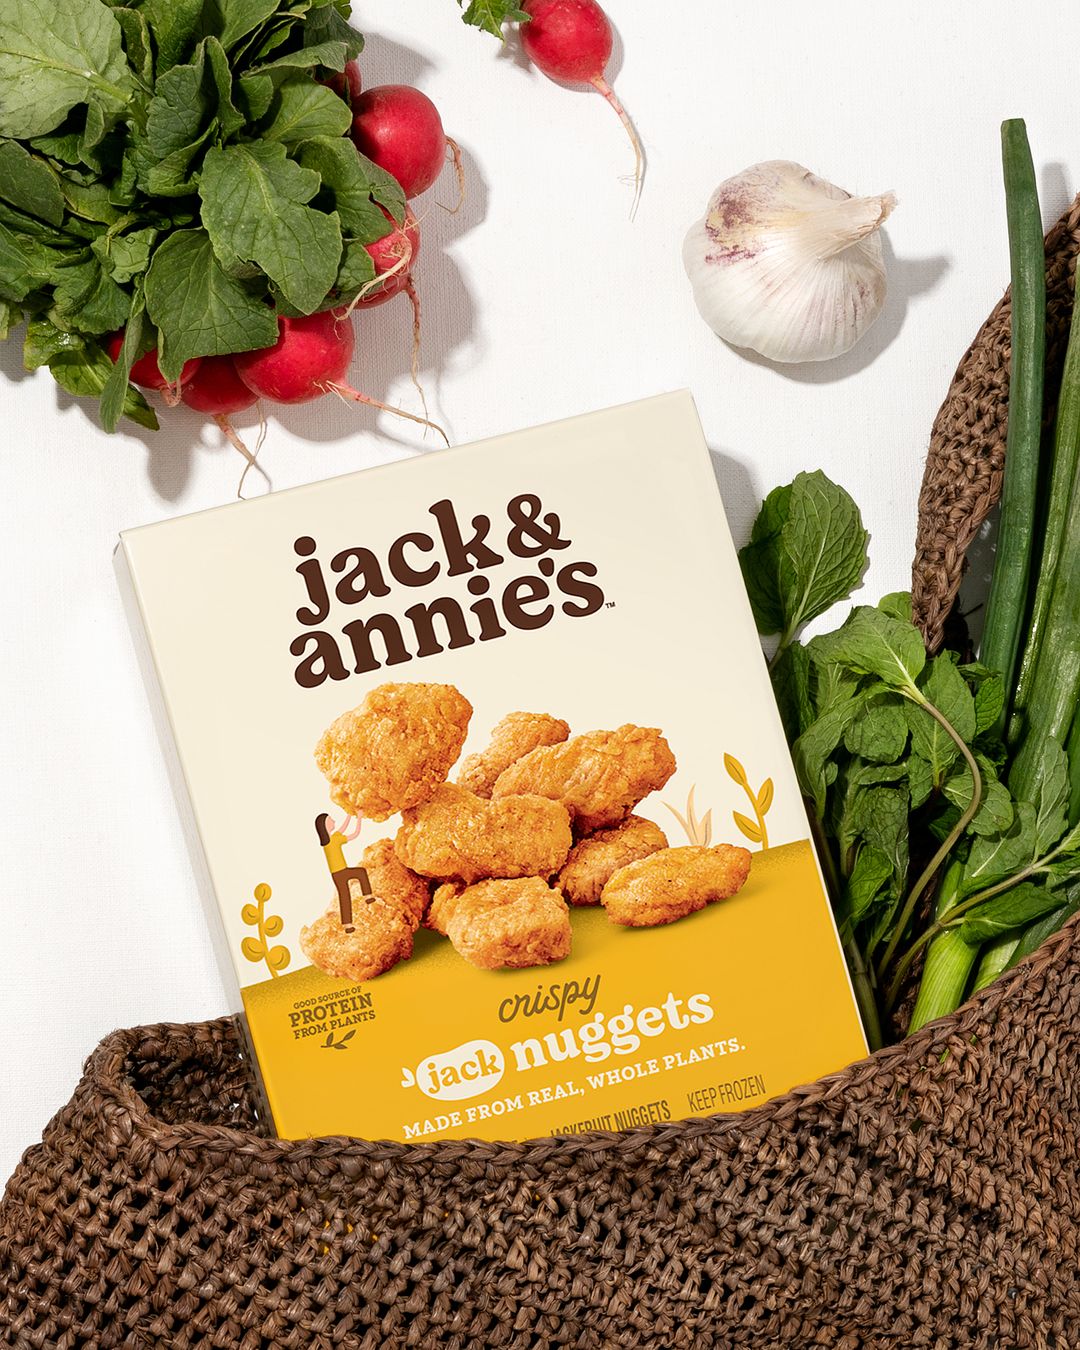 Jack & Annie's in bag with vegetables surrounding